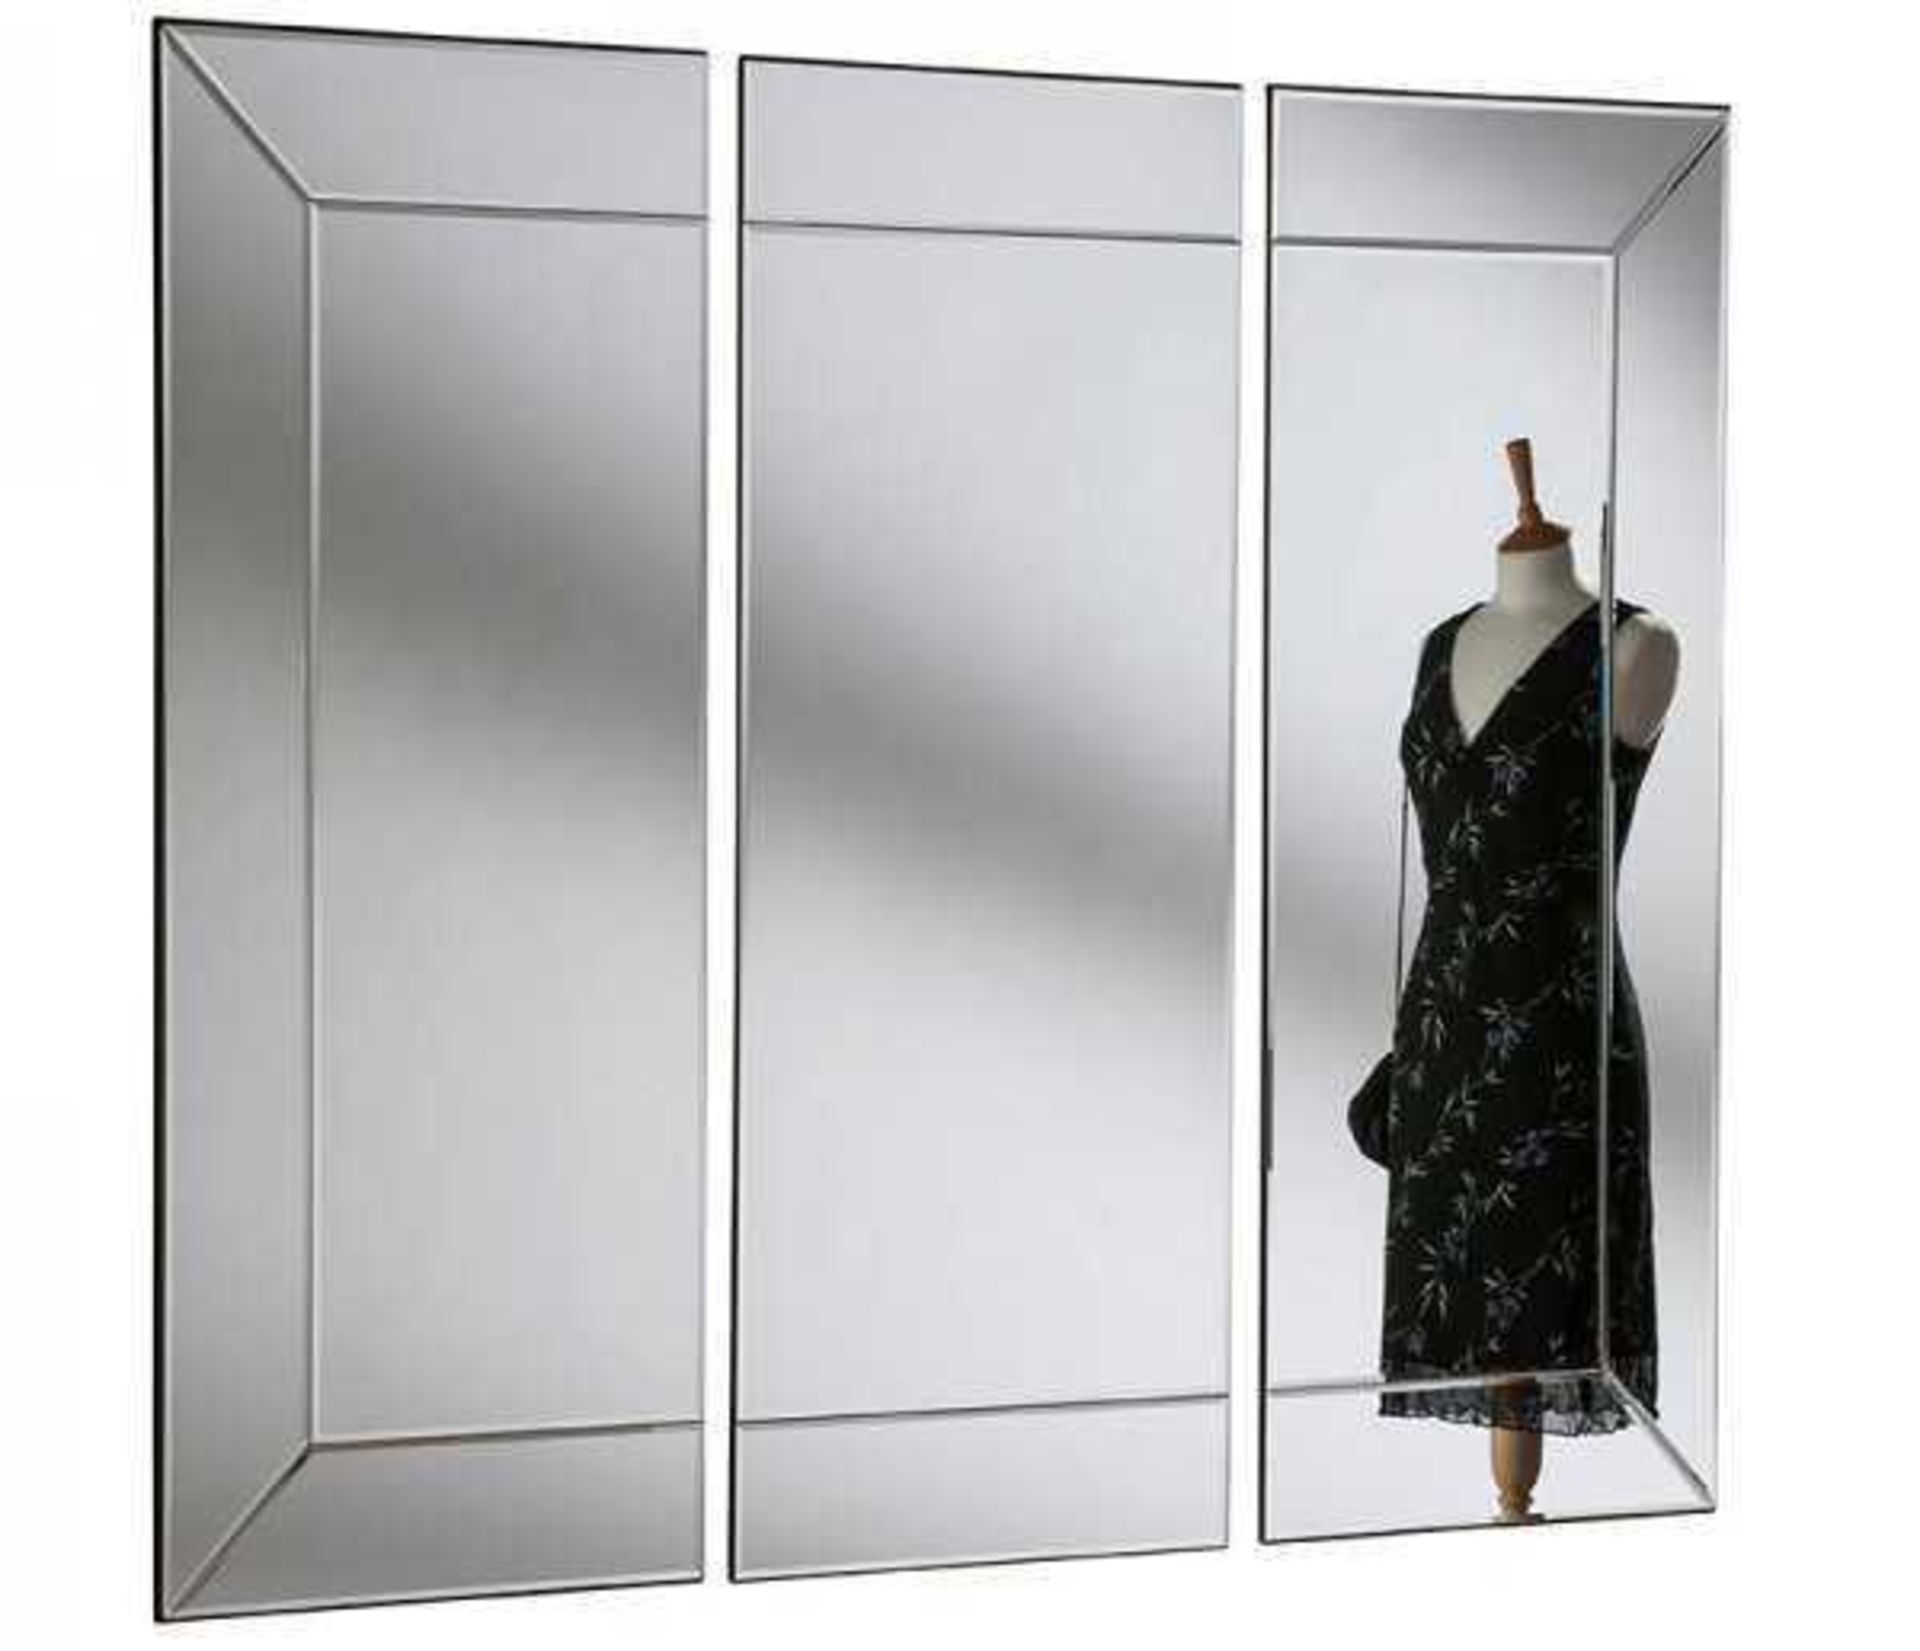 RRP £200 Boxed Quality Bevelled 3 Piece Mirrors Each Panel 60 By 24 Cm